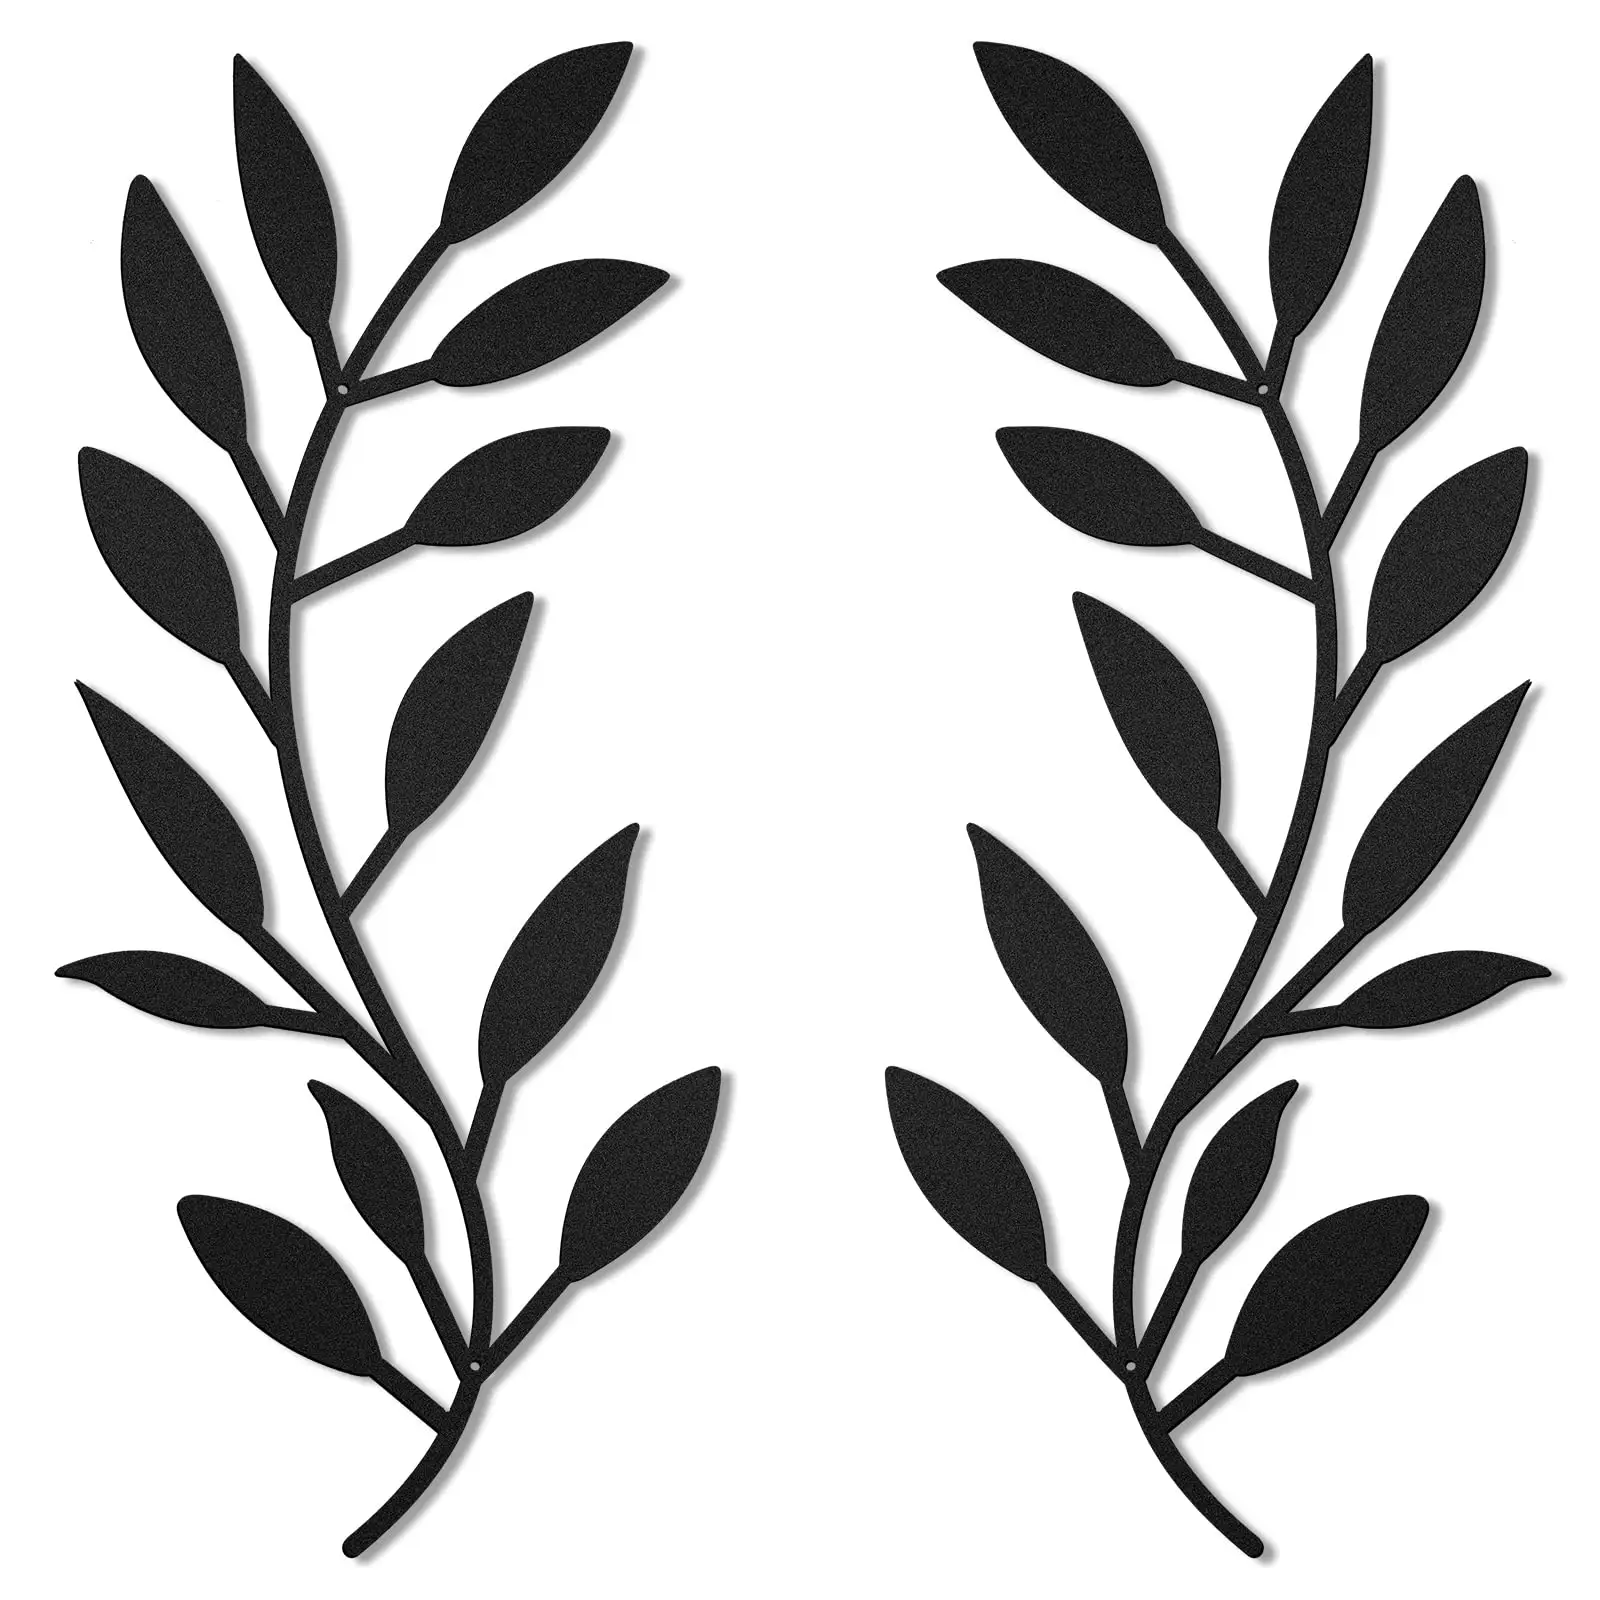 2 Pieces Metal Tree Leaf Wall Decor Vine Olive Branch Leaf Wall Art Wrought Iron Scroll Above The Bed, Living Room, Outdoor Deco